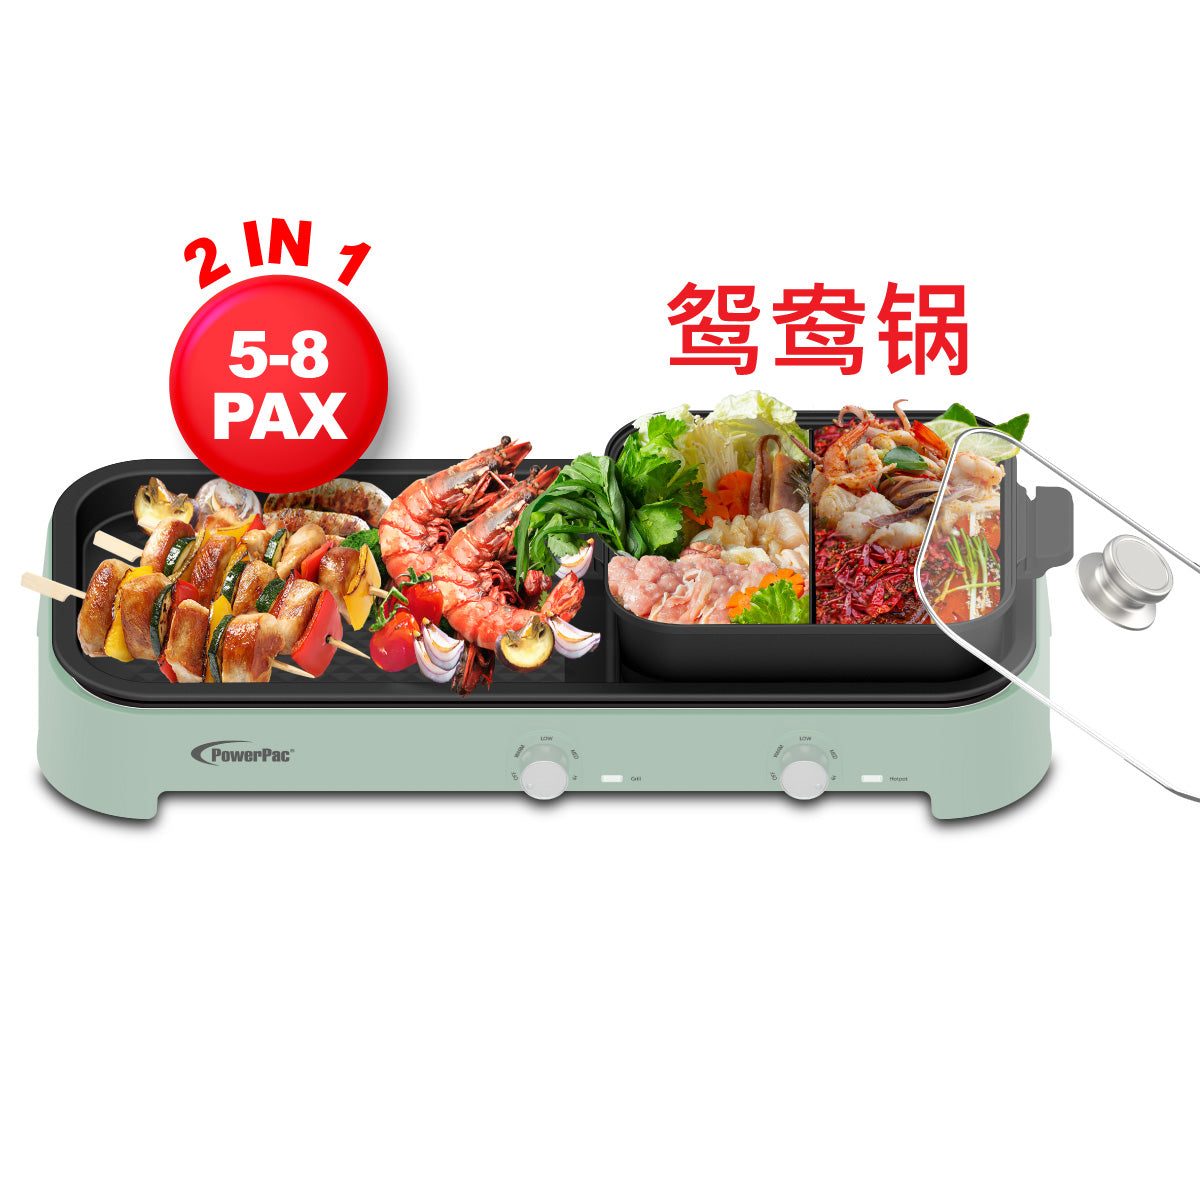 Steamboat with BBQ Grill, 2 in 1 Multi Cooker with Non-stick YuanYang pot (PPMC797)